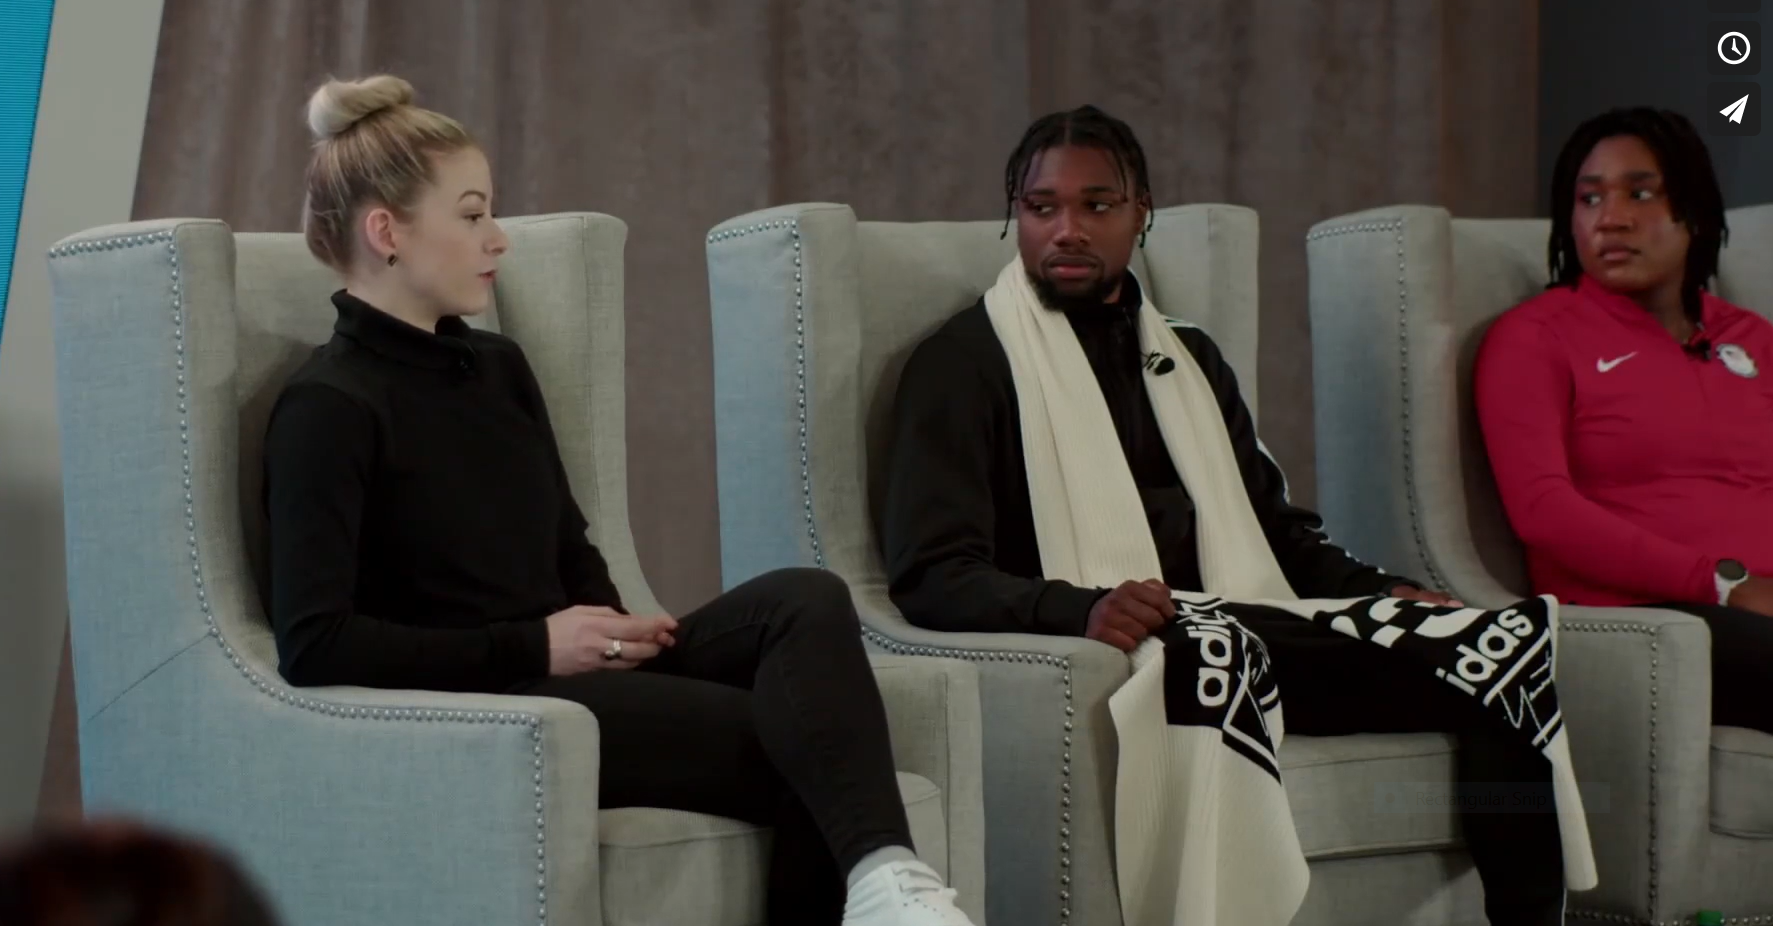 Noah Lyles and double Paralympic sprint champion Deja Young-Craddock look on as Gracie Gold recounts her experience at the TrueSport discussion about athletes and mental health issues ©TrueSport